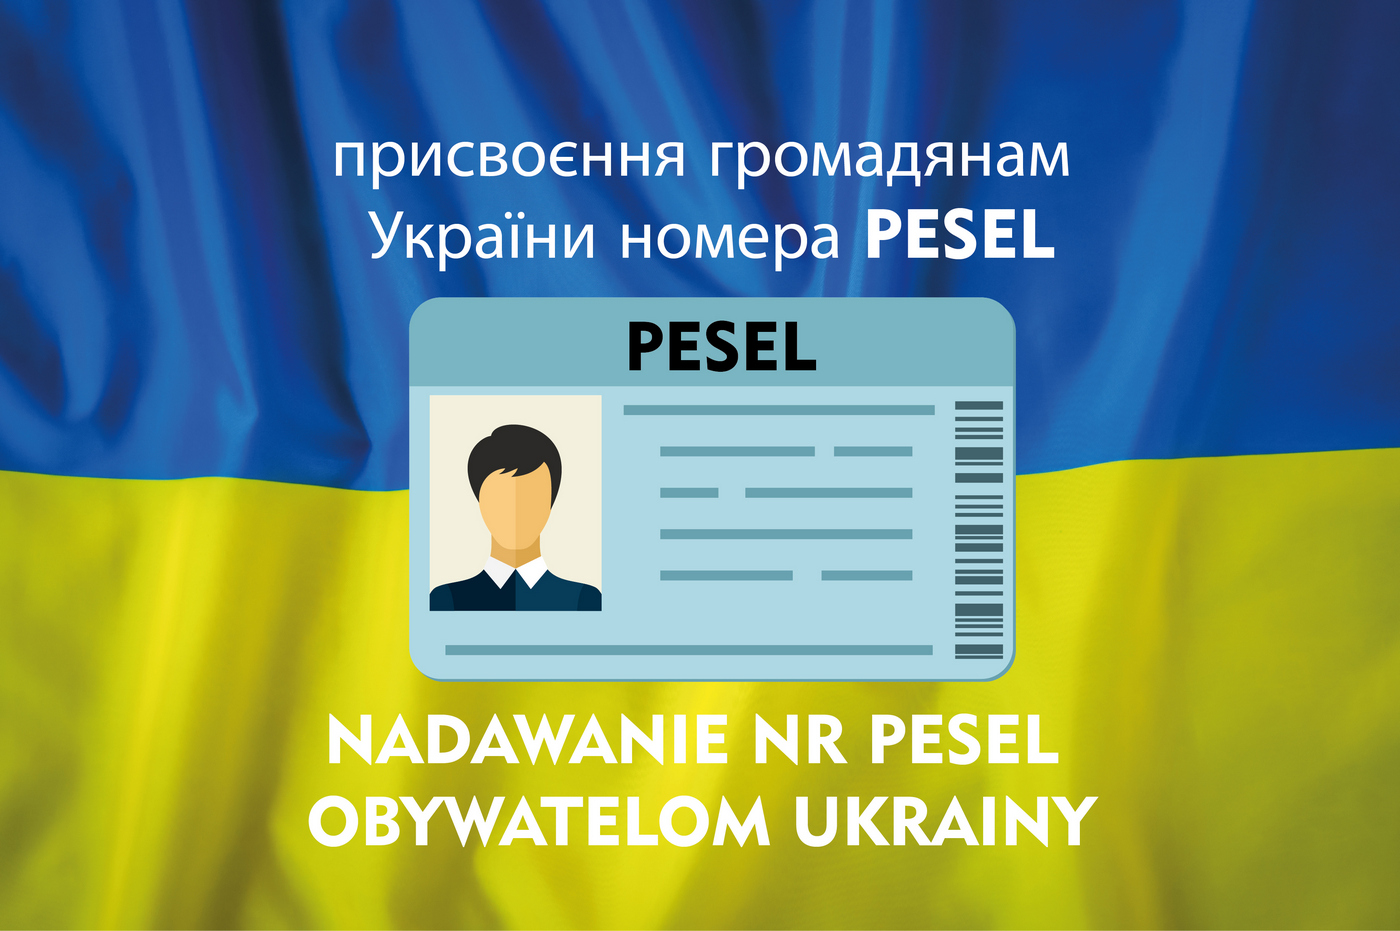 Assigning PESEL numbers to citizens of Ukraine